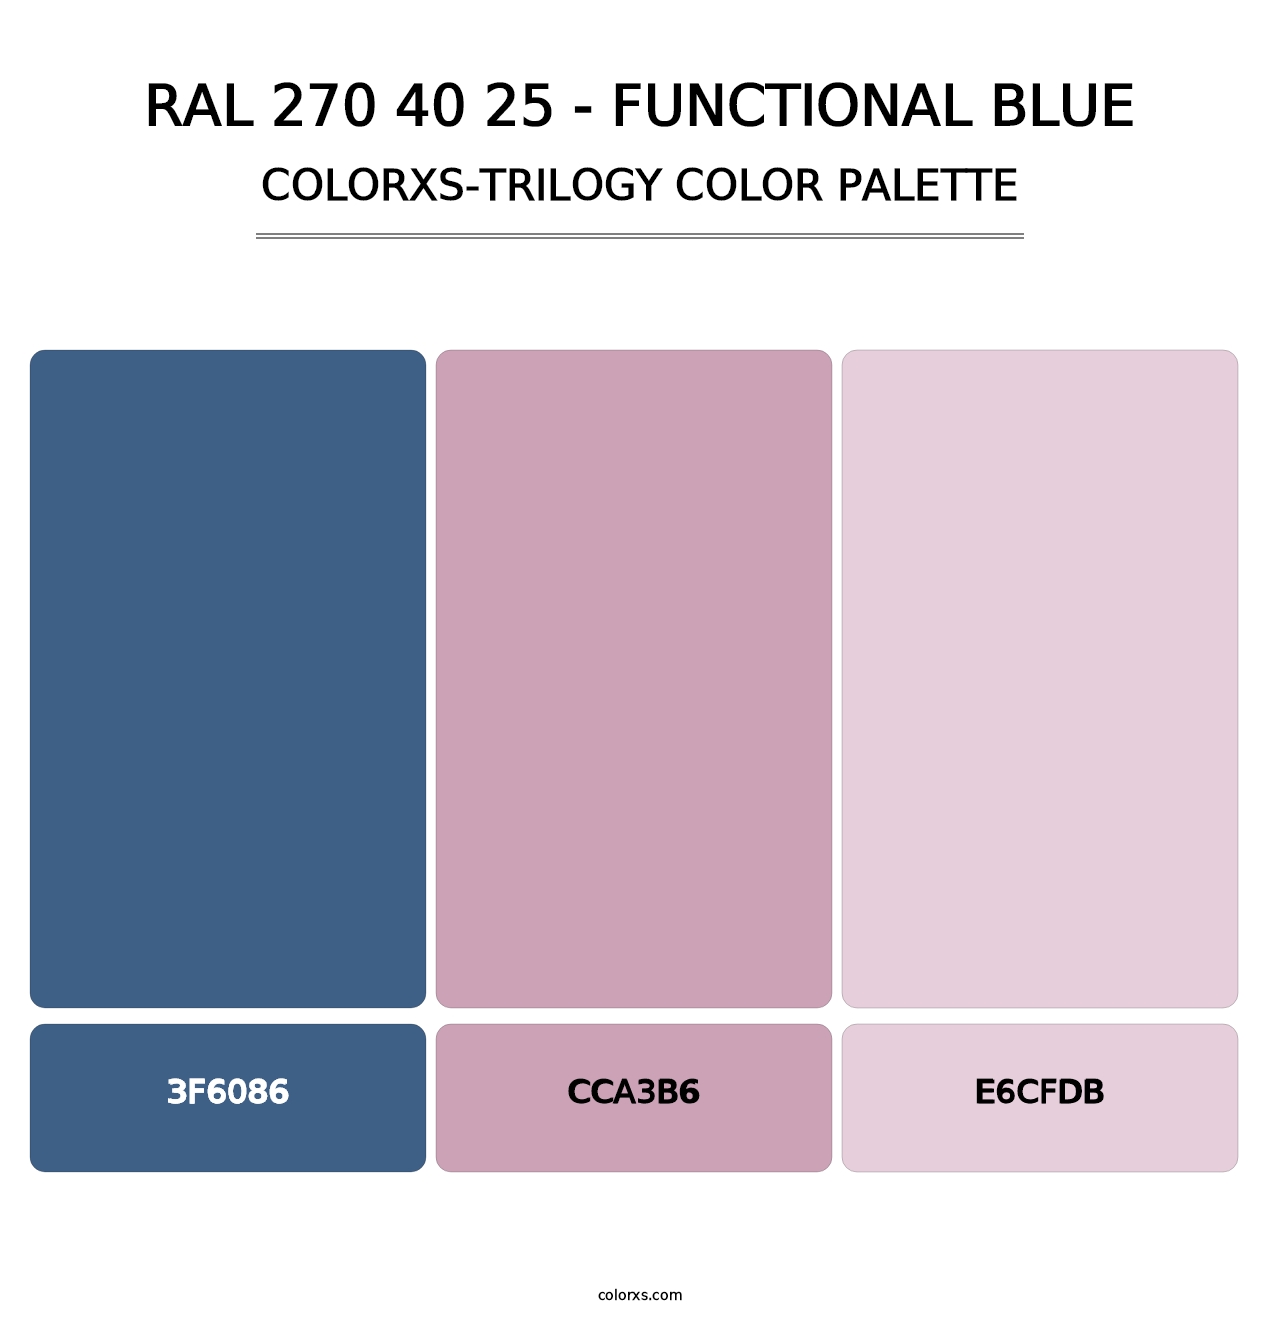 RAL 270 40 25 - Functional Blue - Colorxs Trilogy Palette